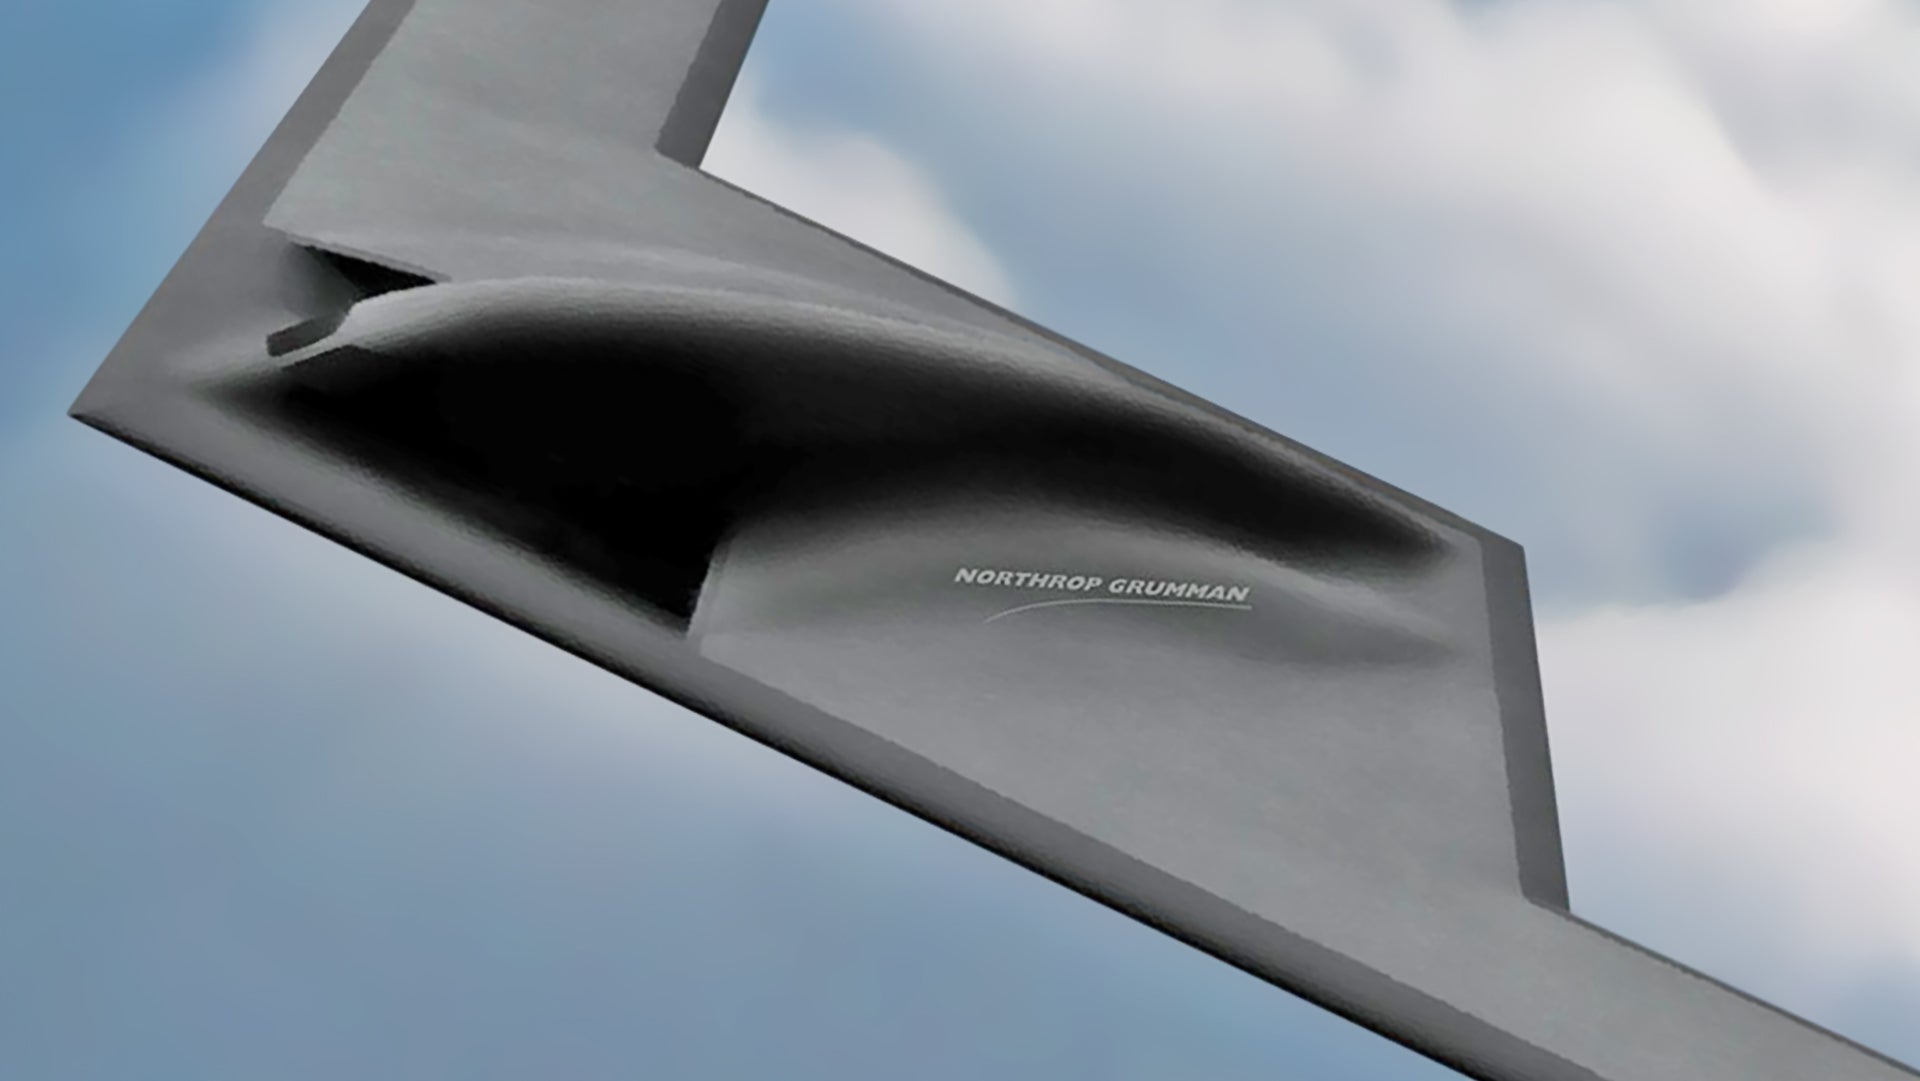 Congressman Details Integration Issues With The B-21’s Exotic Air Inlet Design